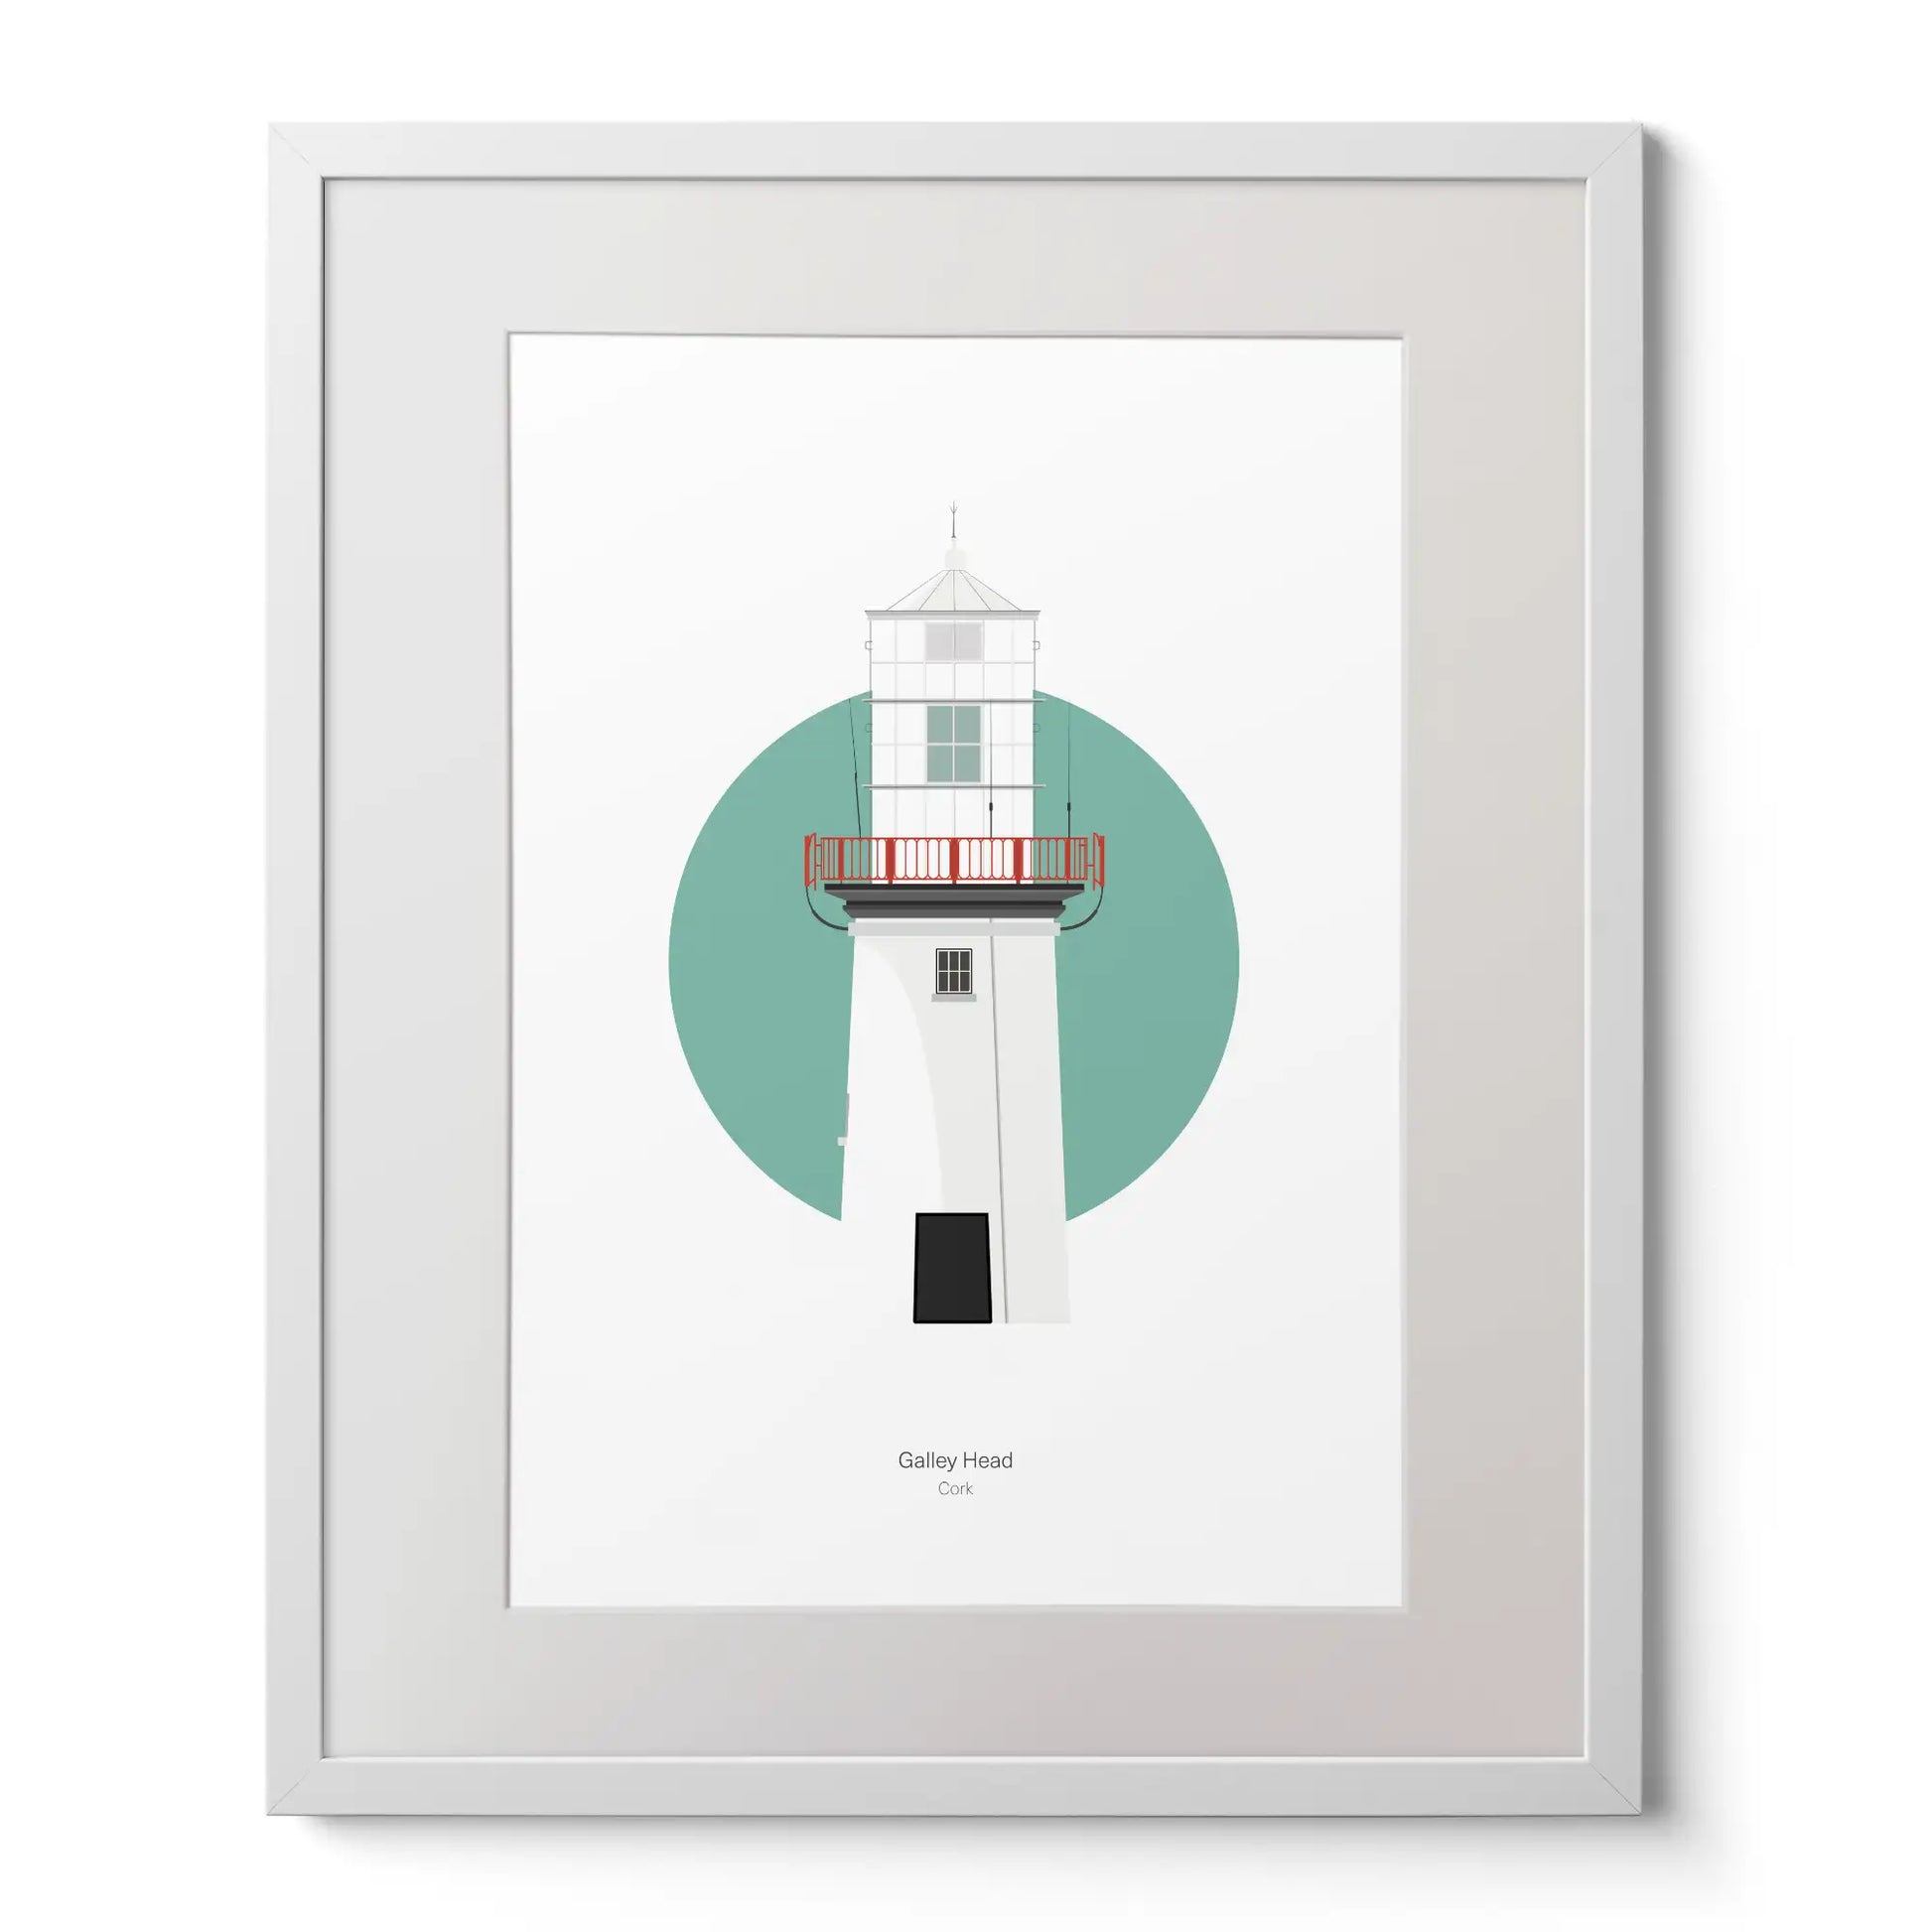 Illustration of Galley Head lighthouse on a white background inside light blue square,  in a white frame measuring 40x50cm.